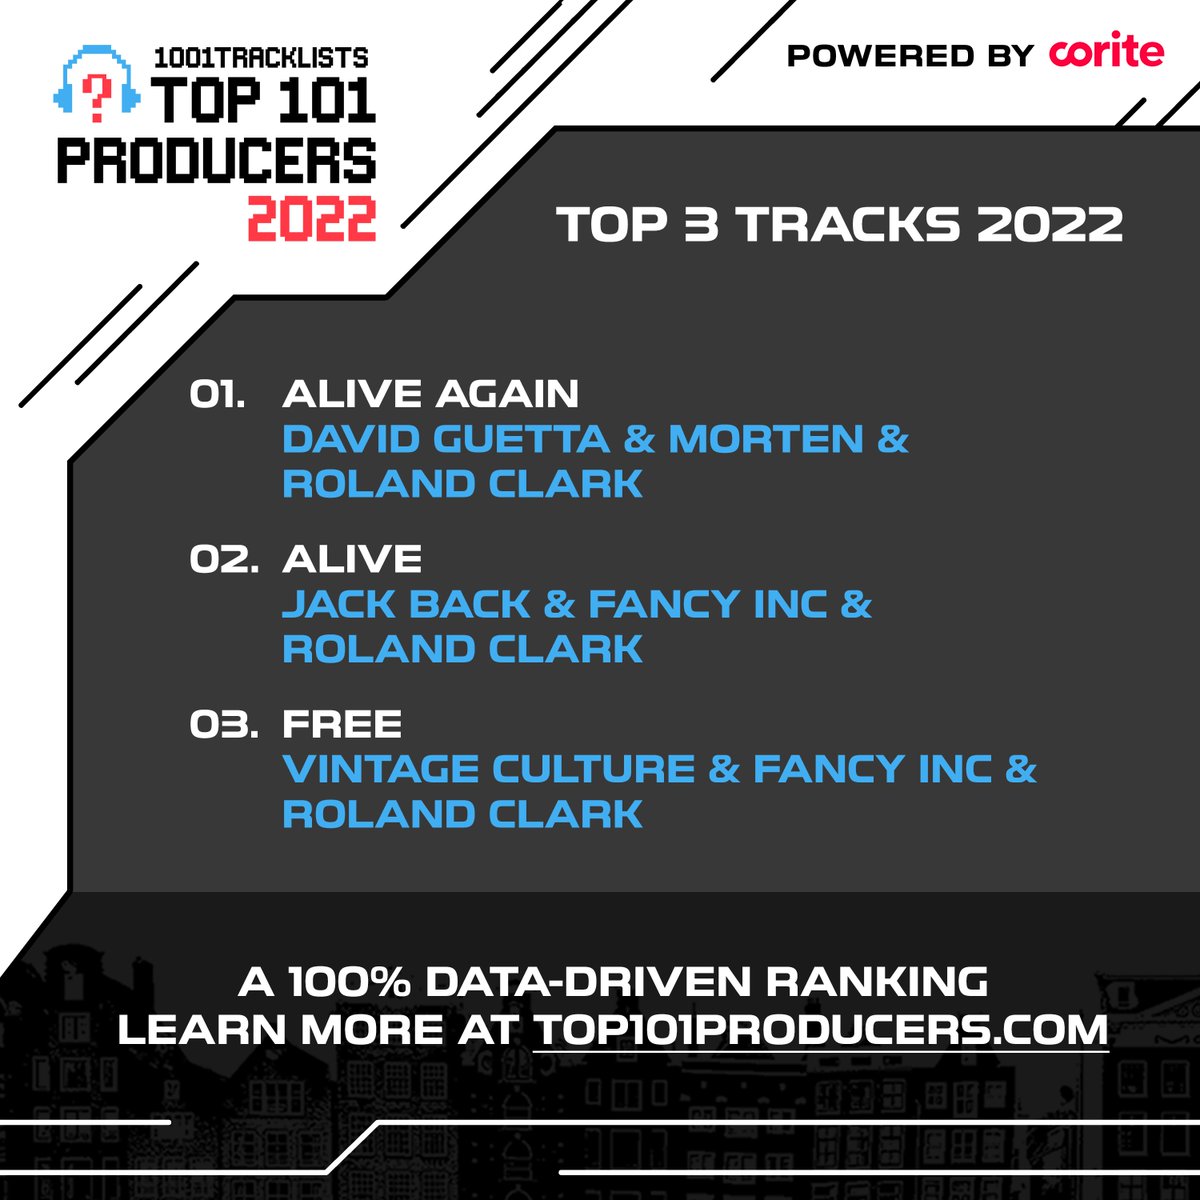 Legendary producer @rolandclark has so many hits to his name this year across collaborations with @davidguetta, @MORTENofficial, @FancyIncMusic, and @VintageCulture, and he enters the rankings for the first time at #62 in the #Top101Producers2022.